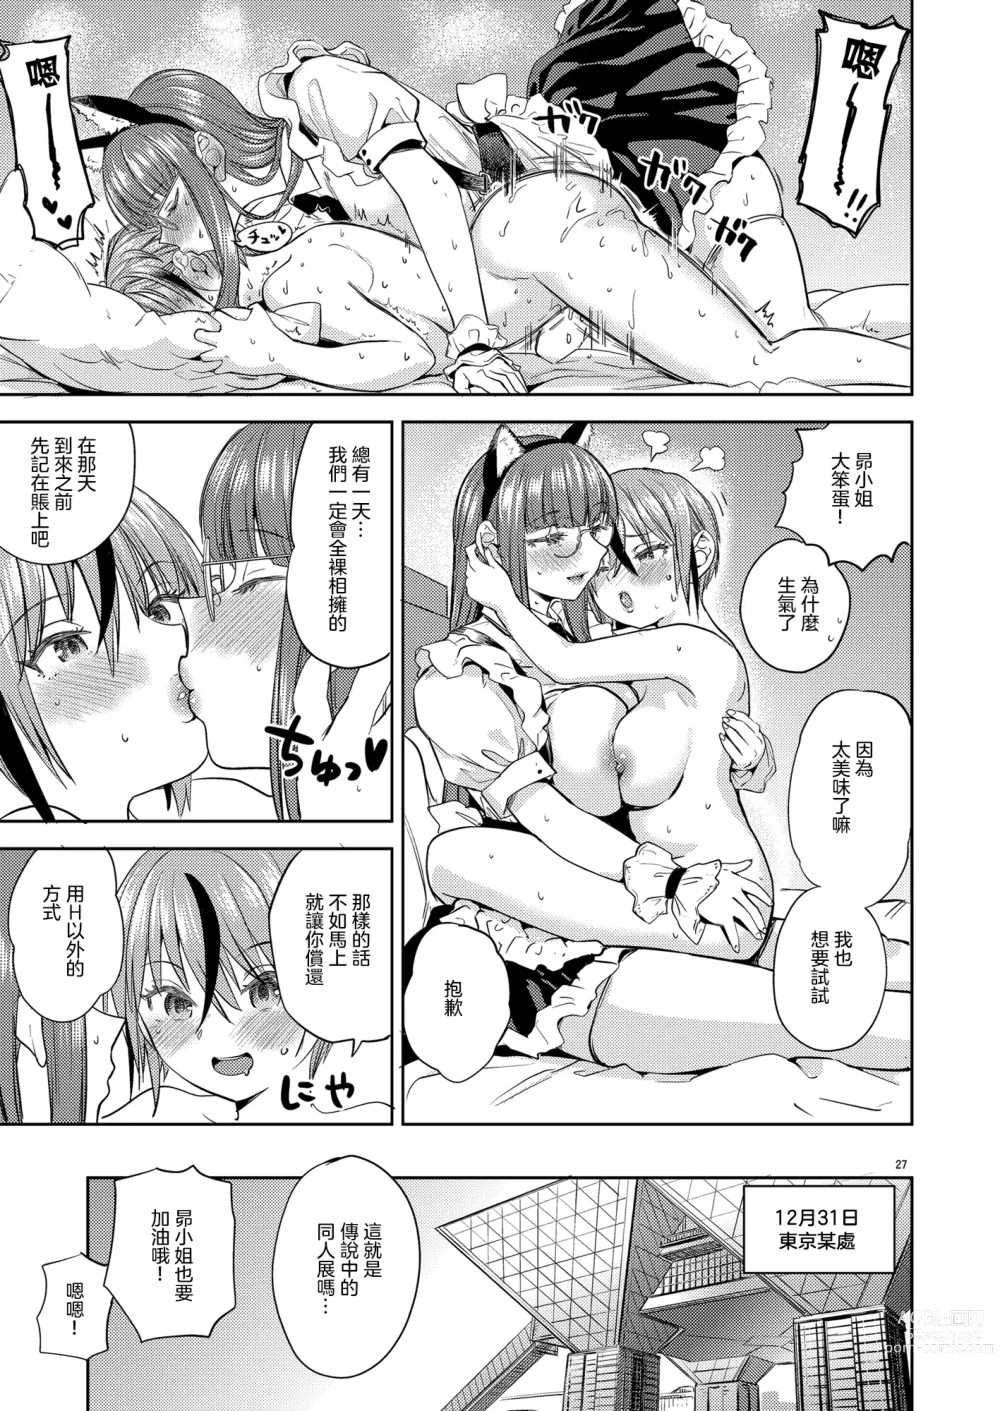 Page 29 of doujinshi 當我們全裸相擁抱之時